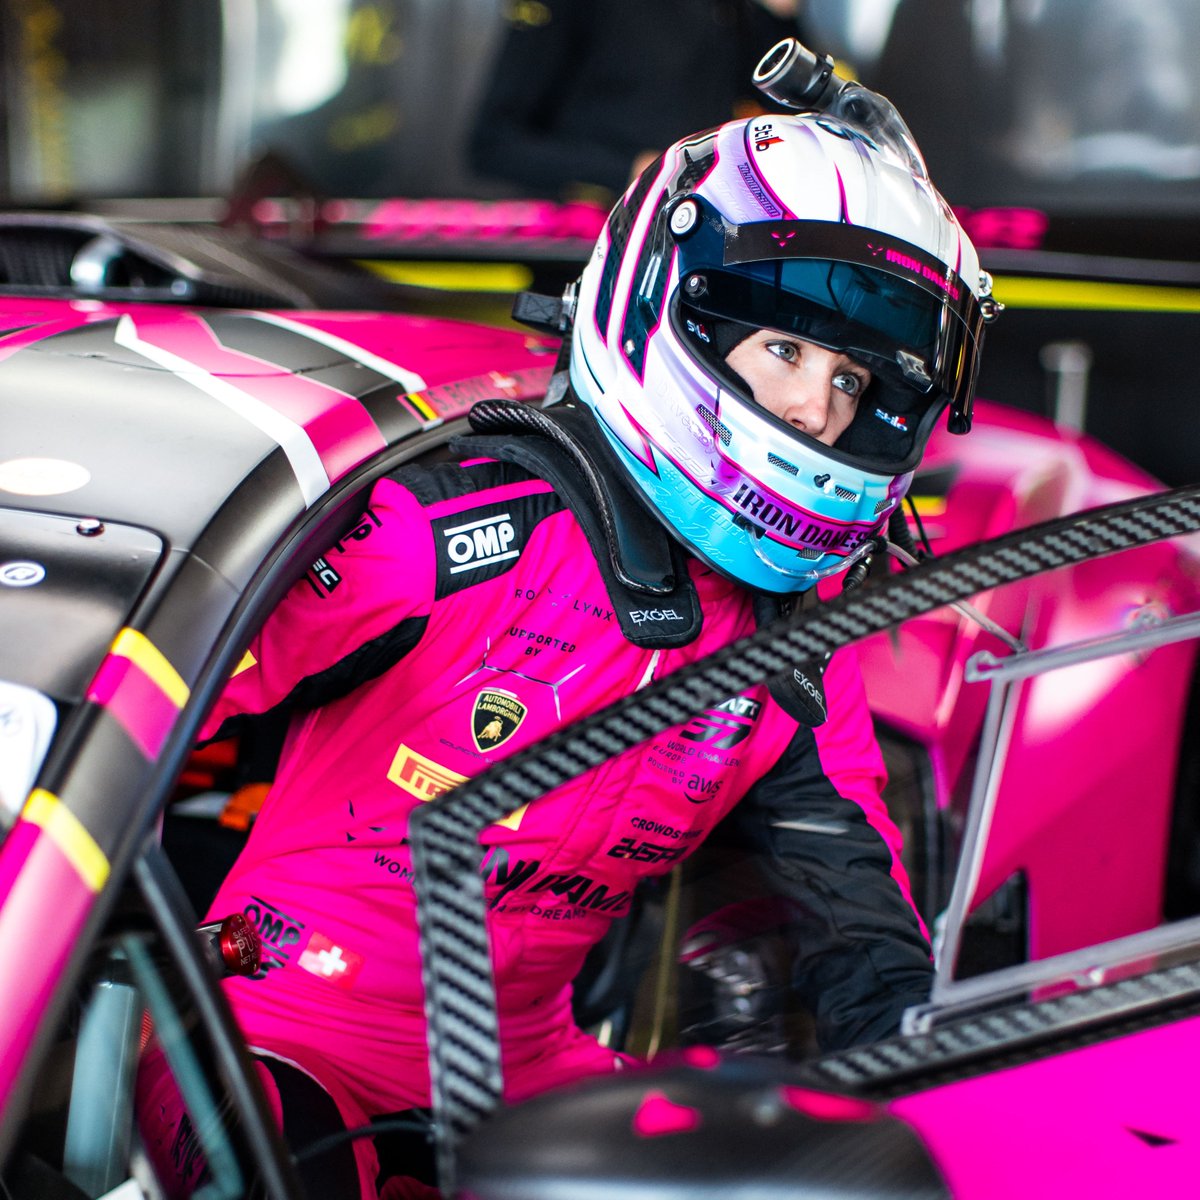 Rahel is in #83 for the first session, her current lap time is 1:56.277 ⏱️

#GTWChEu #FanatecGT